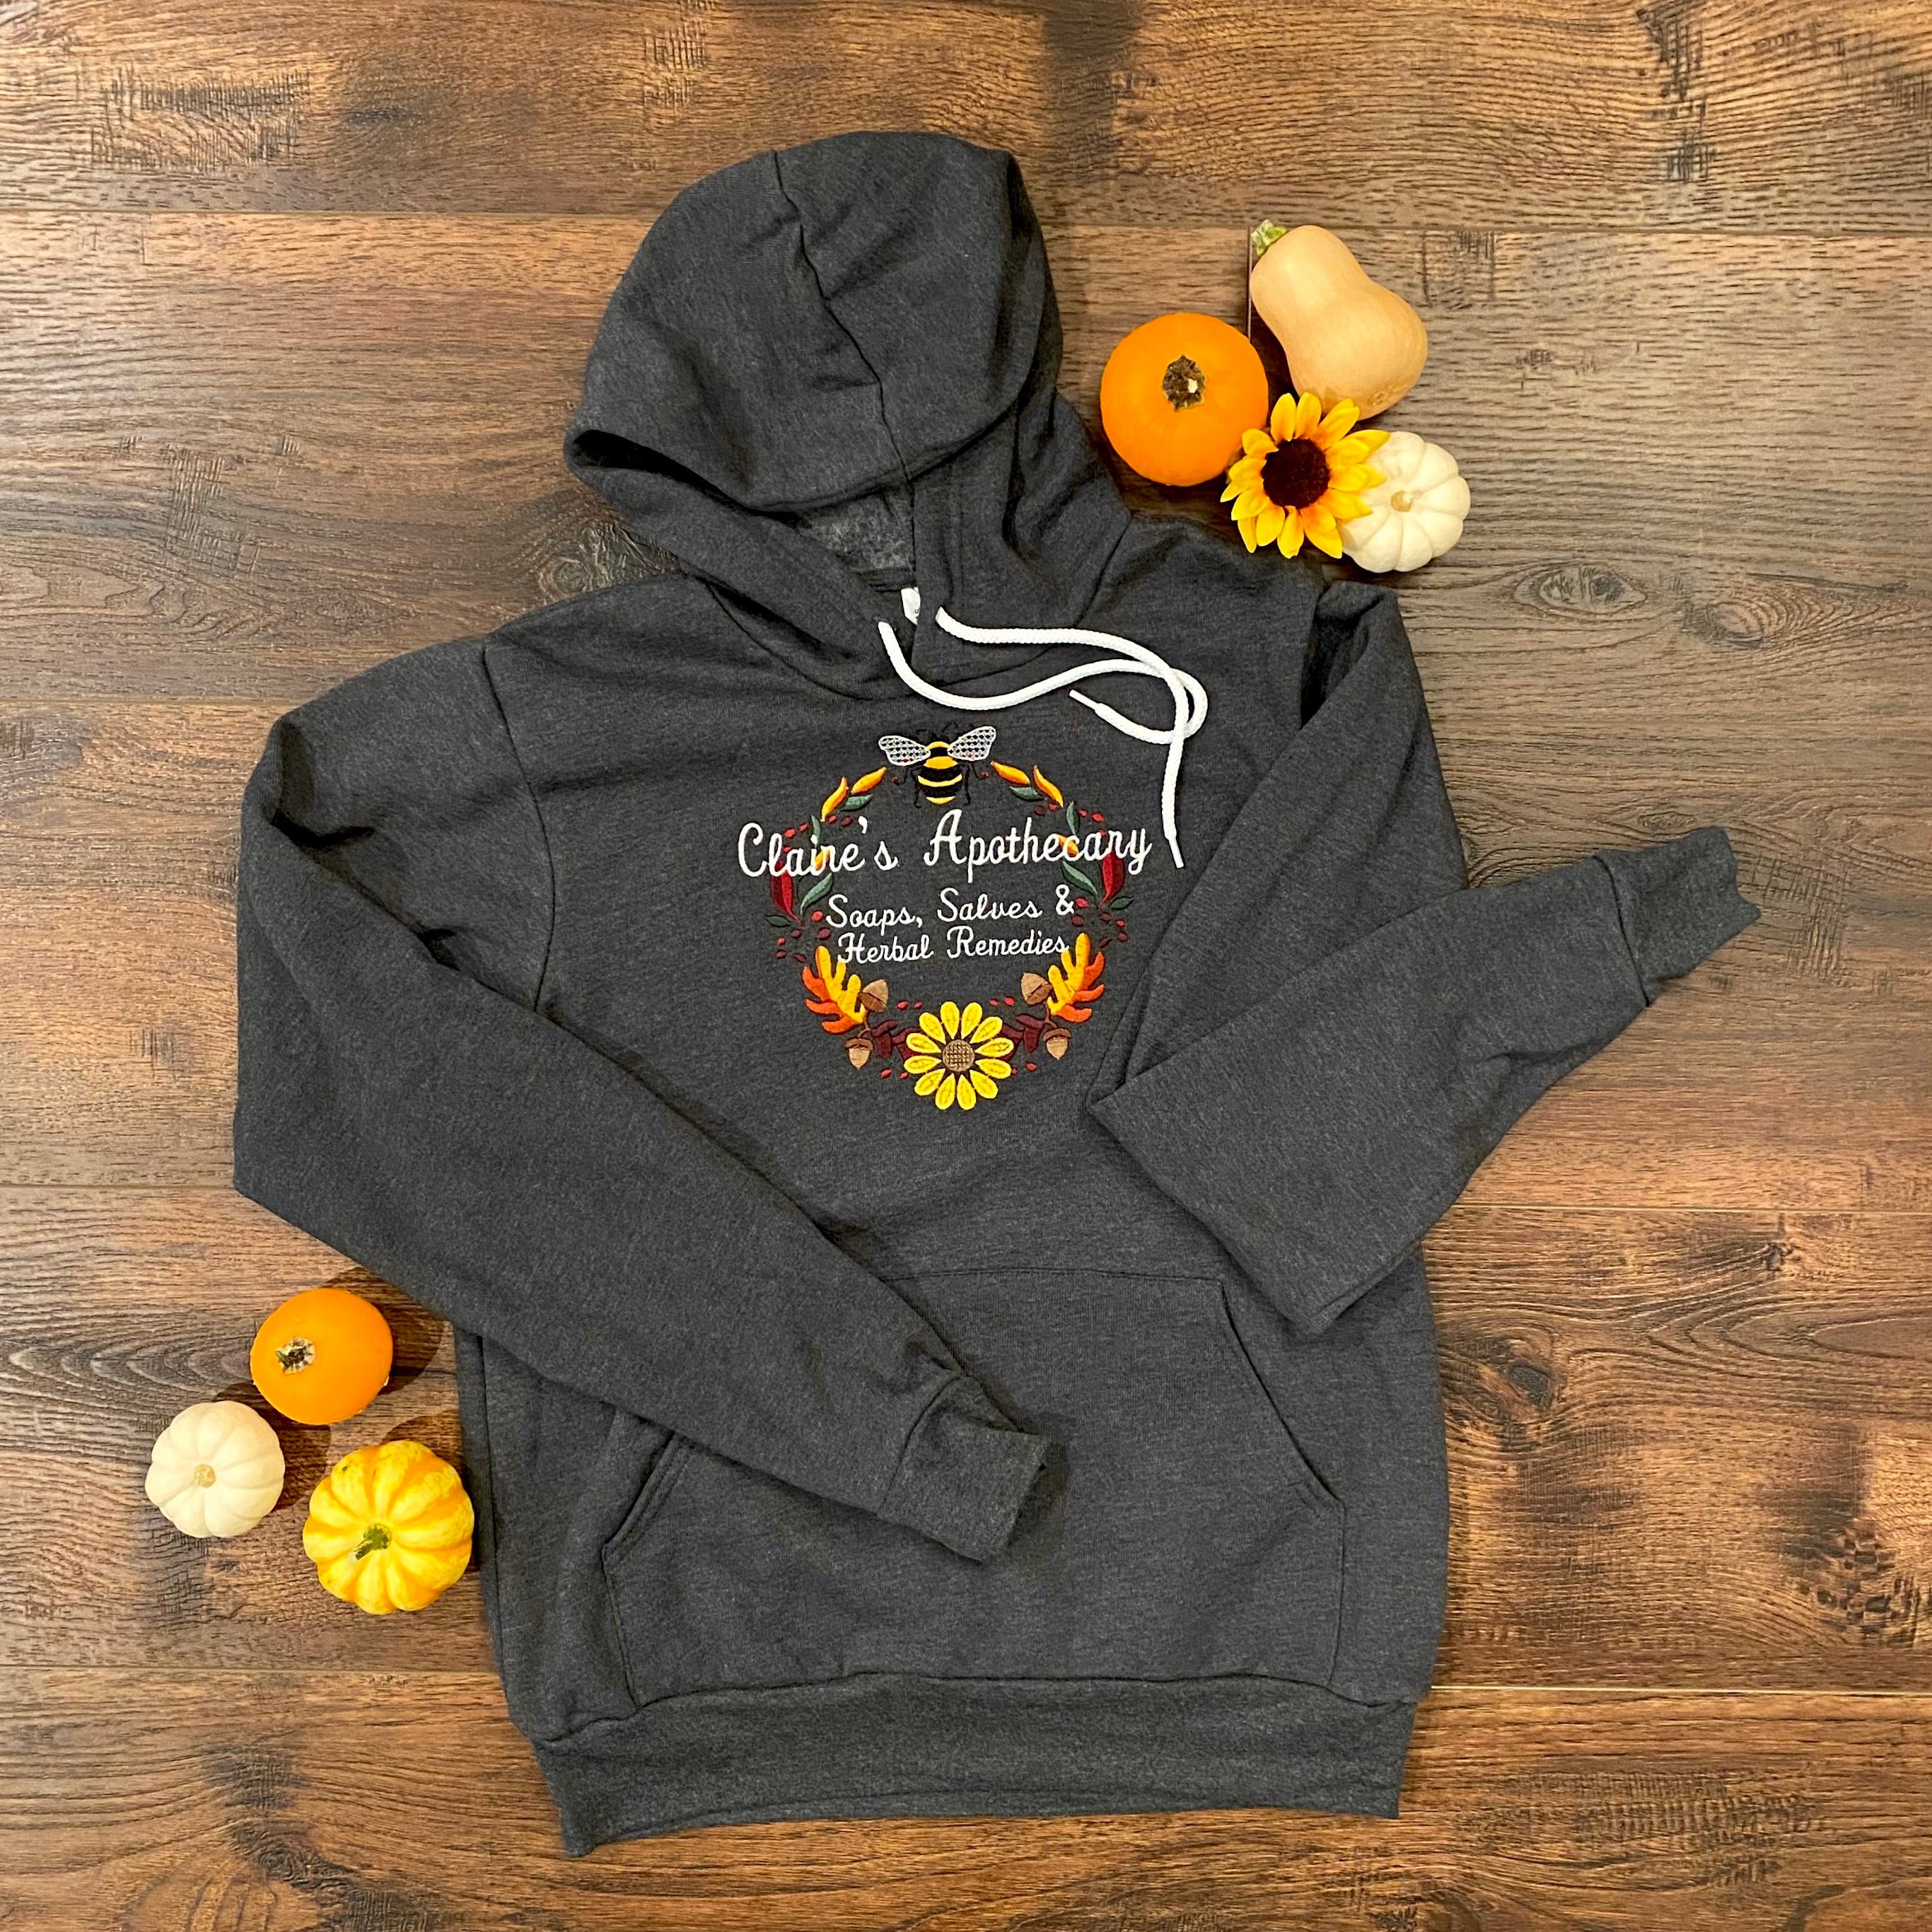 Embroidered Claire's Apothecary Fall Wreath Soft Fleece Unisex Sweatshirt Hoodie - Outlander Inspiration